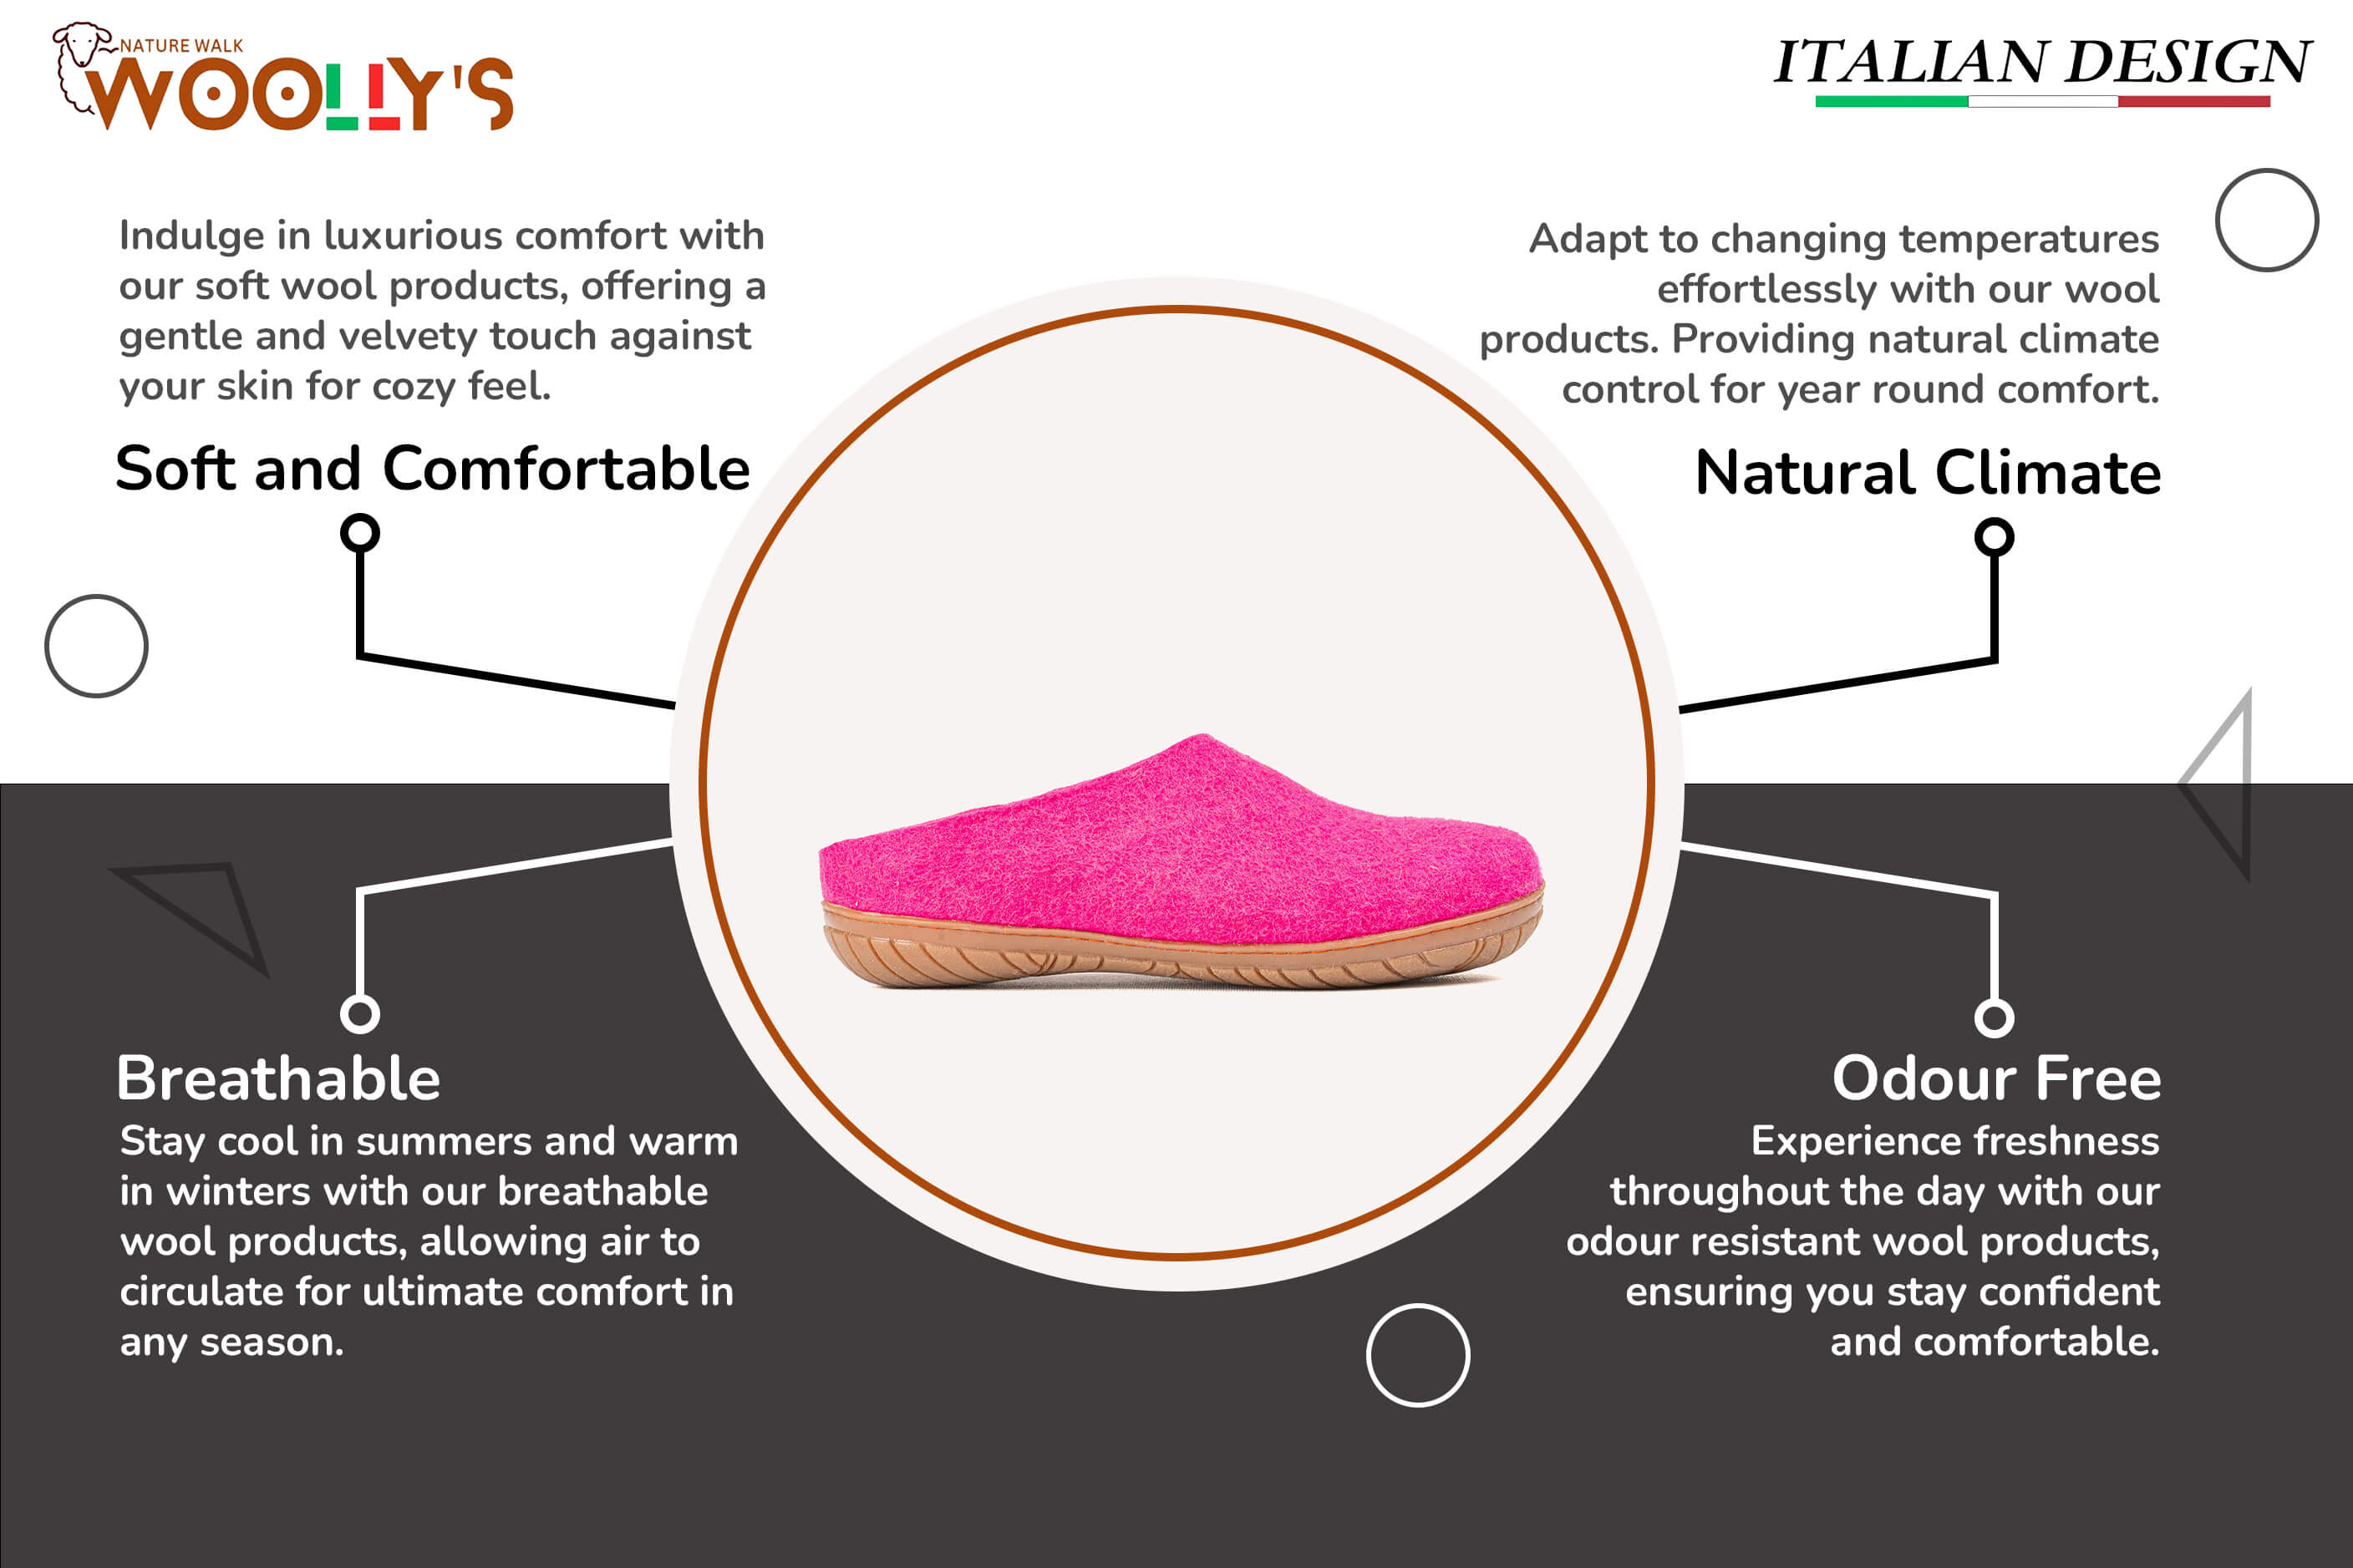 Outdoor Open Heel Slippers With Rubber Sole - Fuchsia Feature 